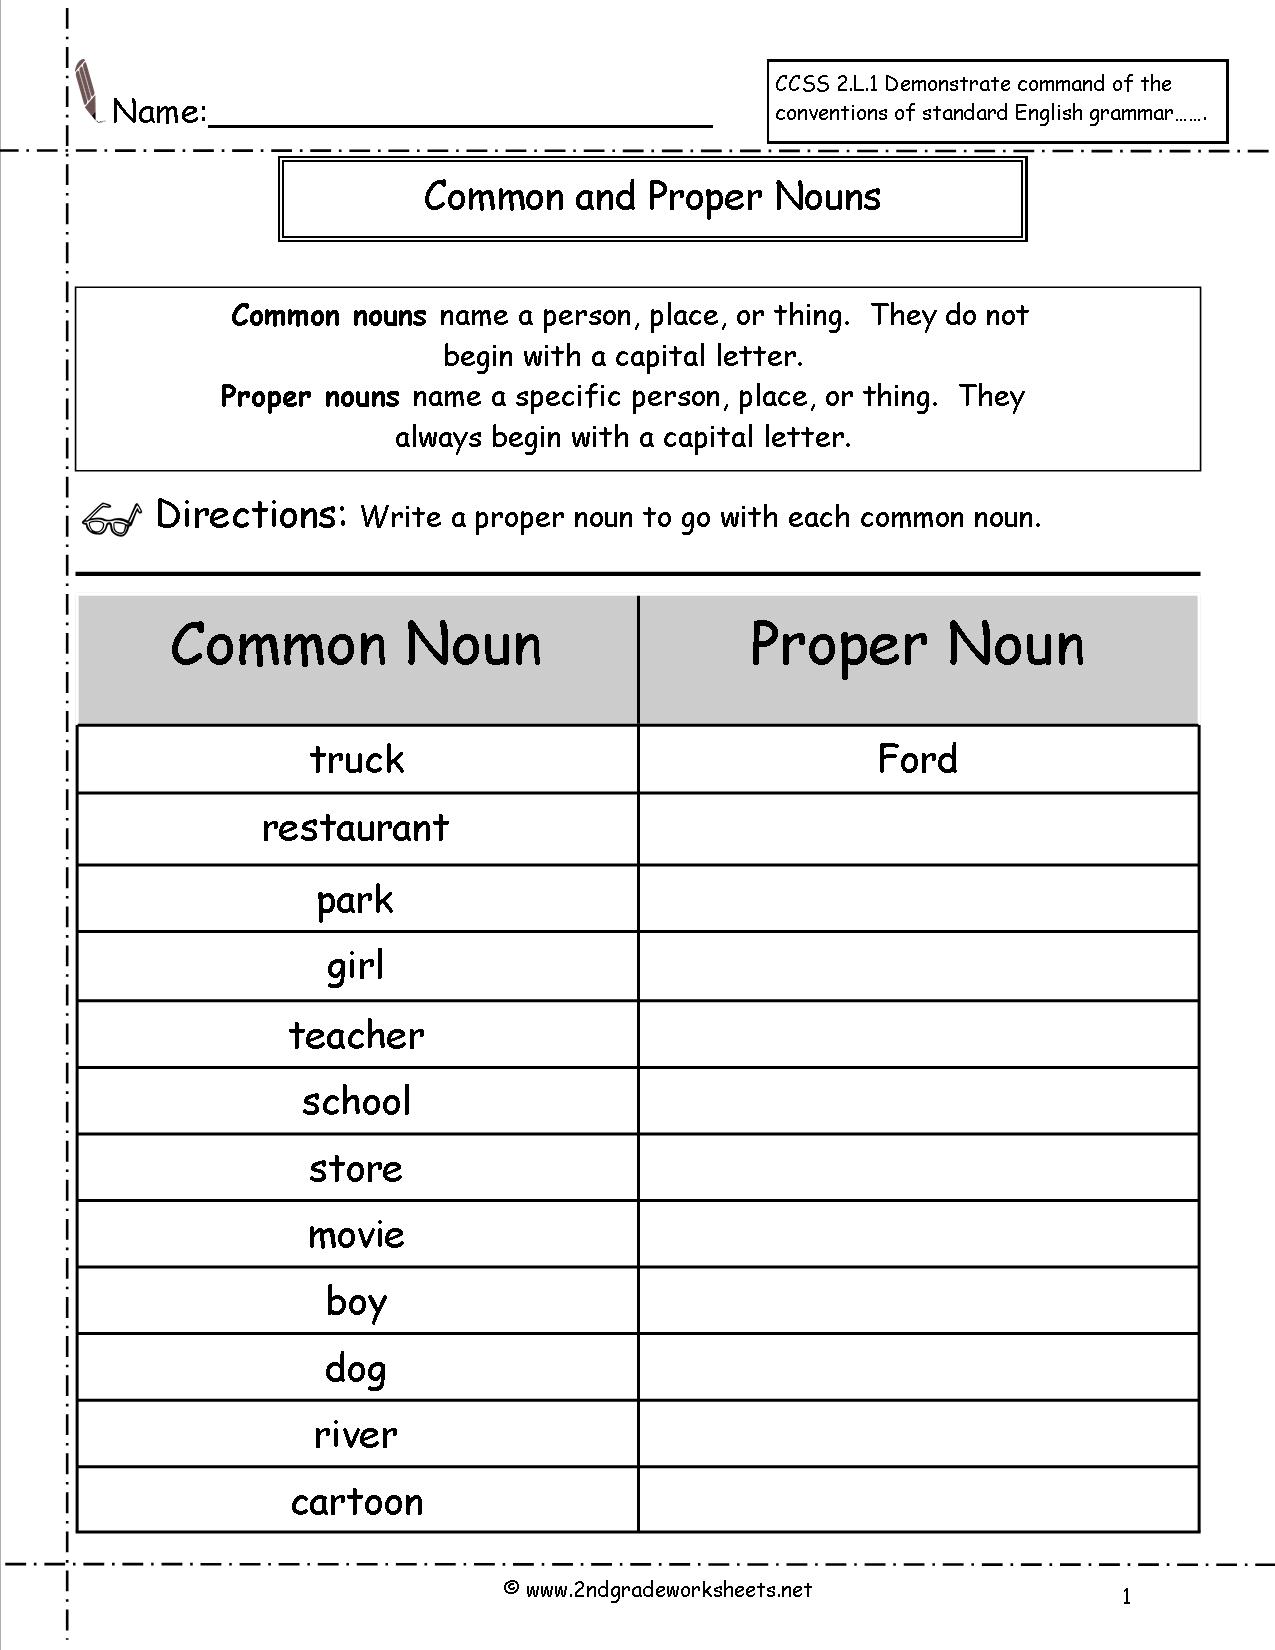 19 Best Images Of 2nd Grade English Worksheets Nouns Verbs Printable 